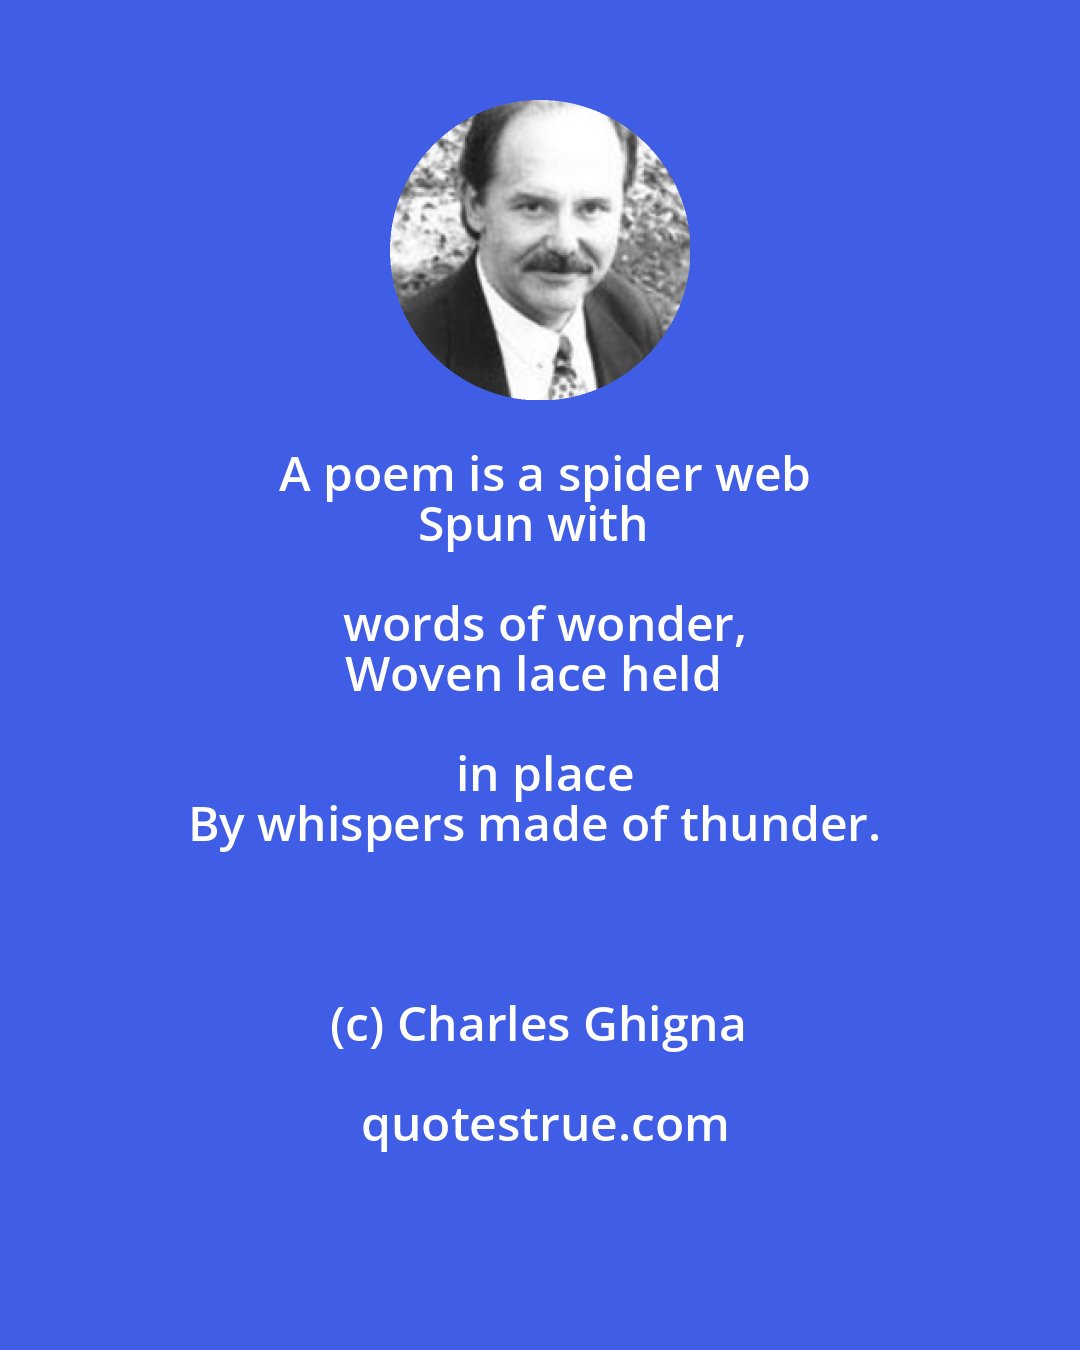 Charles Ghigna: A poem is a spider web
Spun with words of wonder,
Woven lace held in place
By whispers made of thunder.